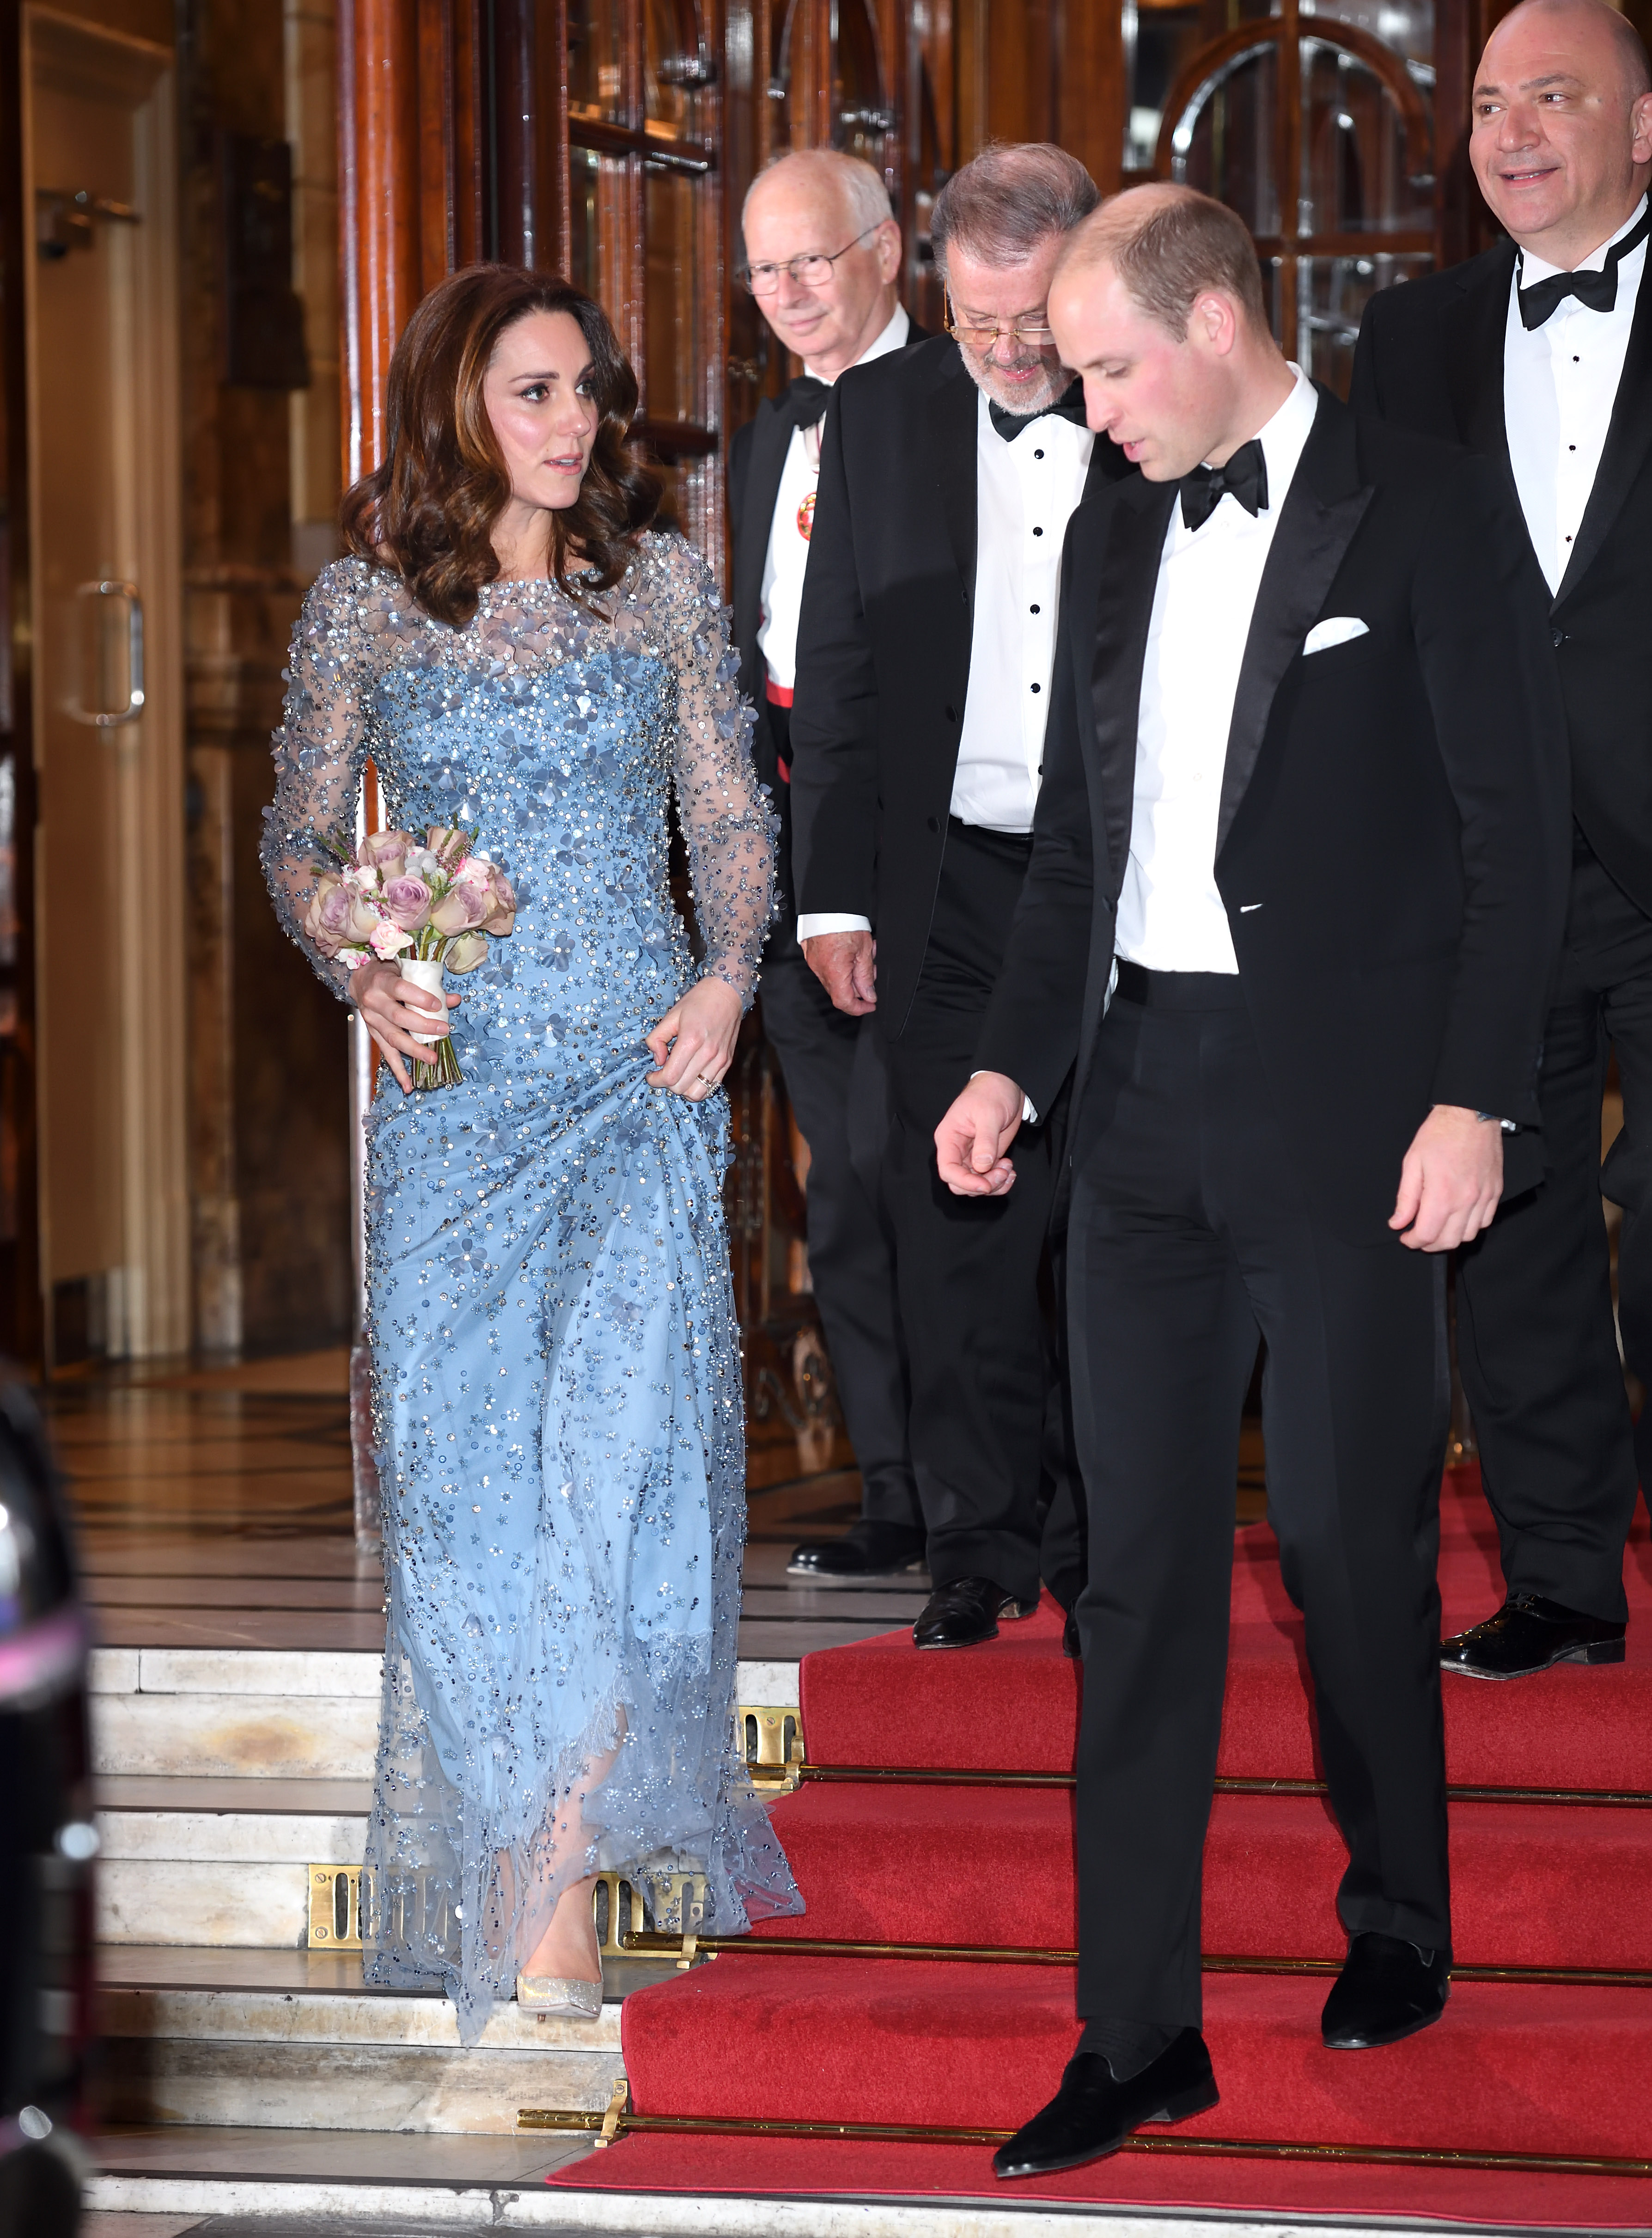 LONDON, ENGLAND - NOVEMBER 24: Catherine, Duchess of Cambridge and Prince William, Duke of Cambridge attend the Royal Variety Performance at the Palladium Theatre on November 24, 2017 in London, England. (Photo by Karwai Tang/WireImage)